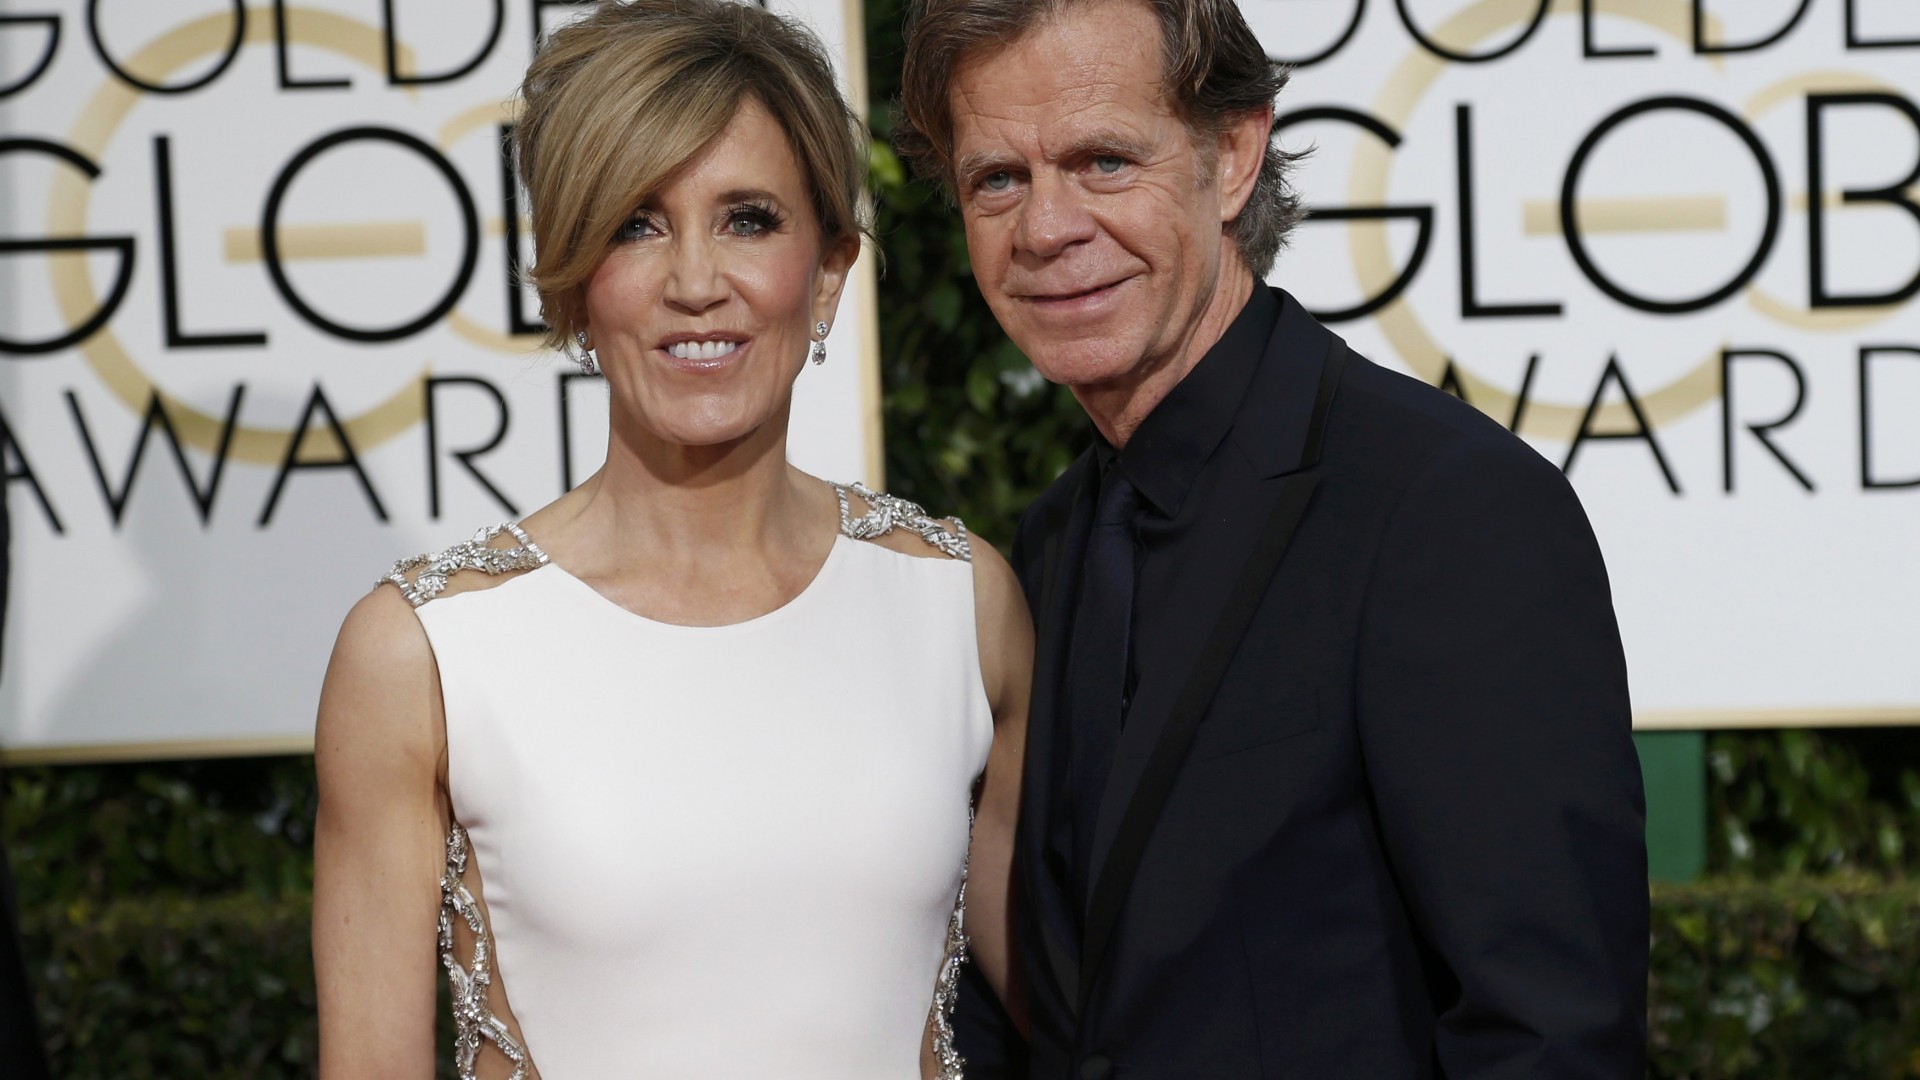 Felicity Huffman, WIlliam Macy, Most Popular Celebs in 2015, actor, screenwriter, stage, television actress (horizontal)